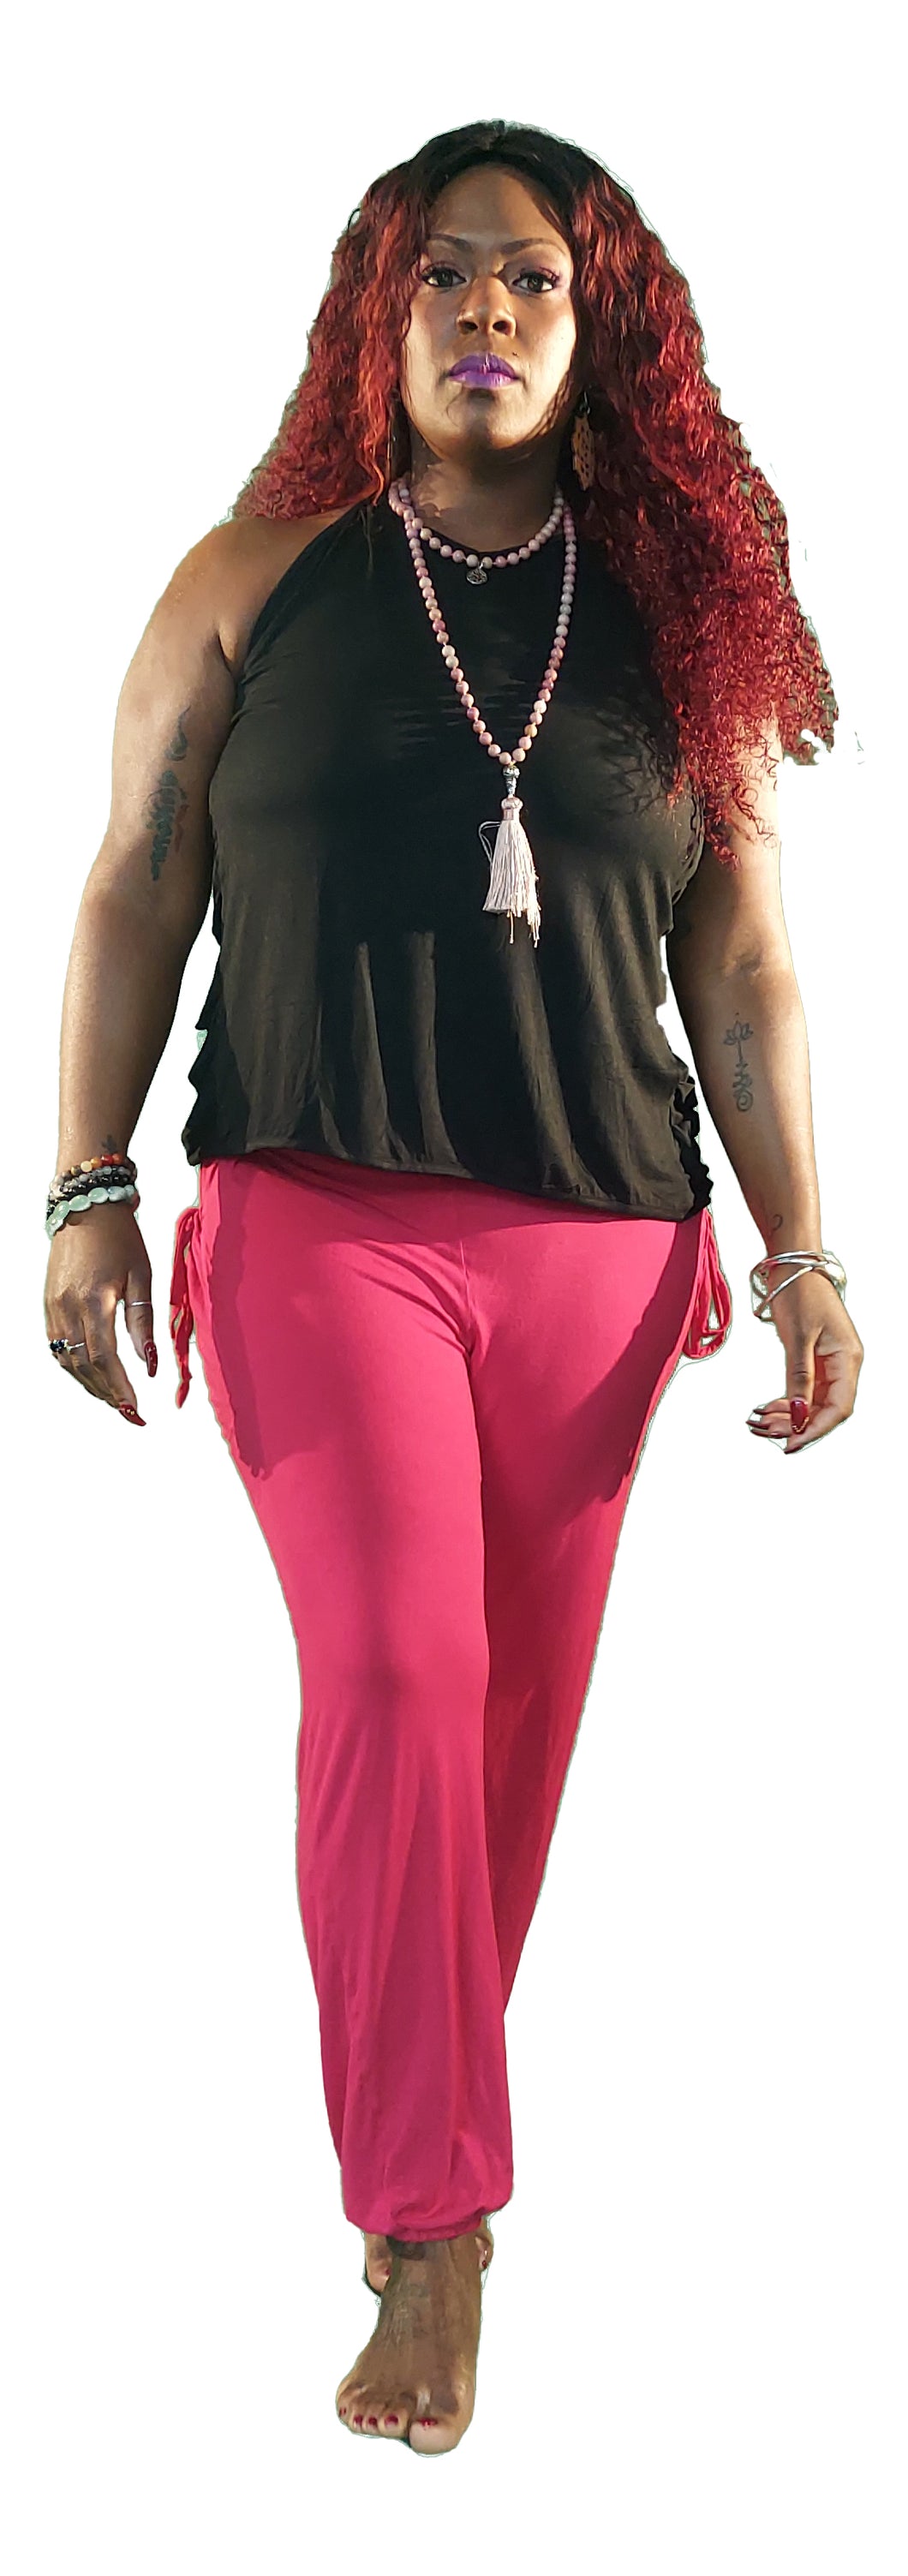 YOGAZ Eco-Friendly Bamboo Hot-Pink  Pants with our Signature Pocket in Pocket design